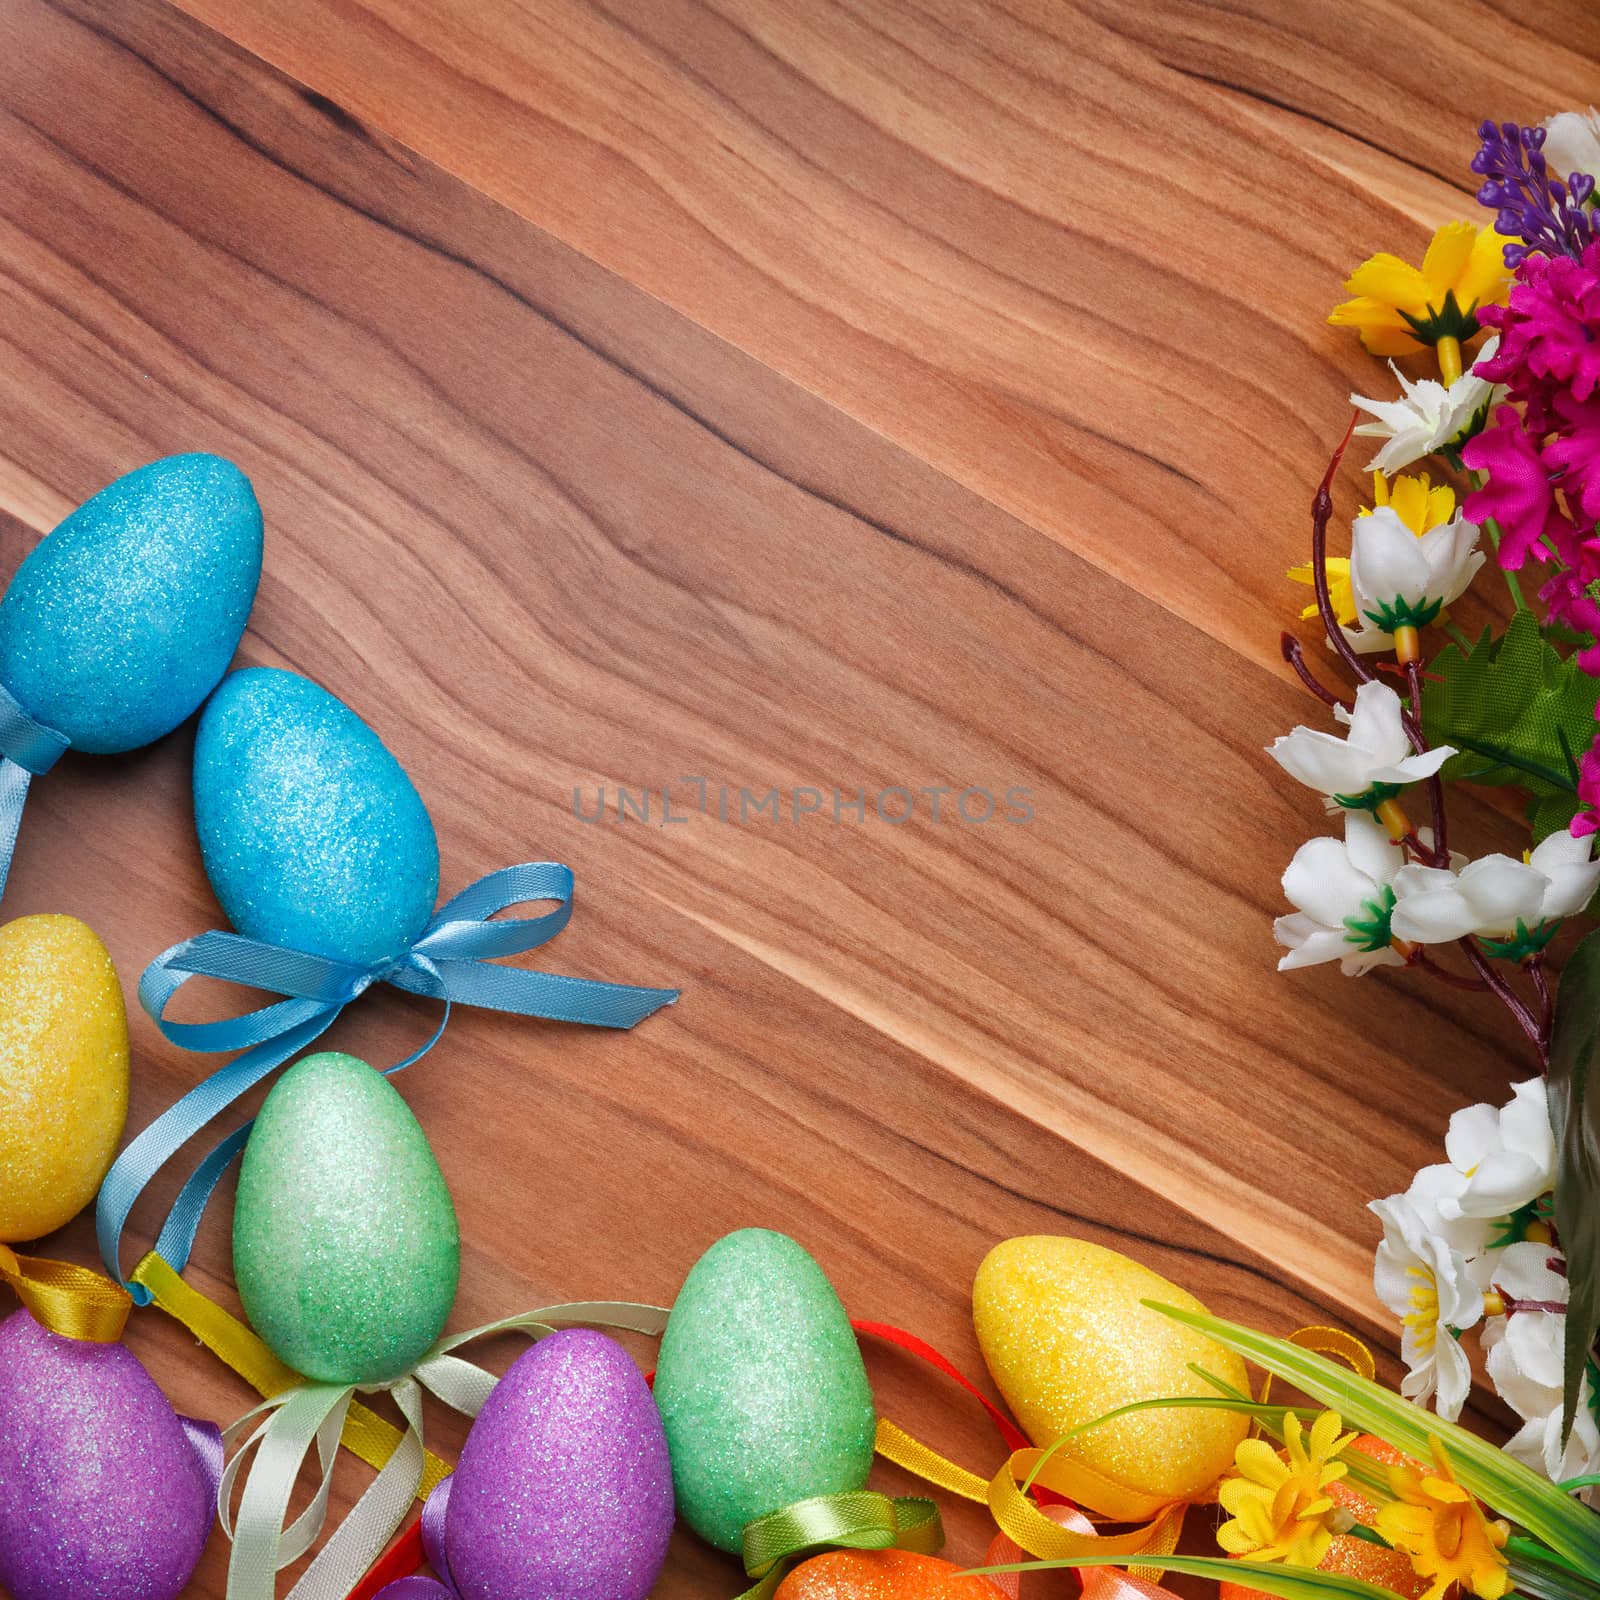 Easter flower arrangement and colorful eggs on a wooden surface with space for text